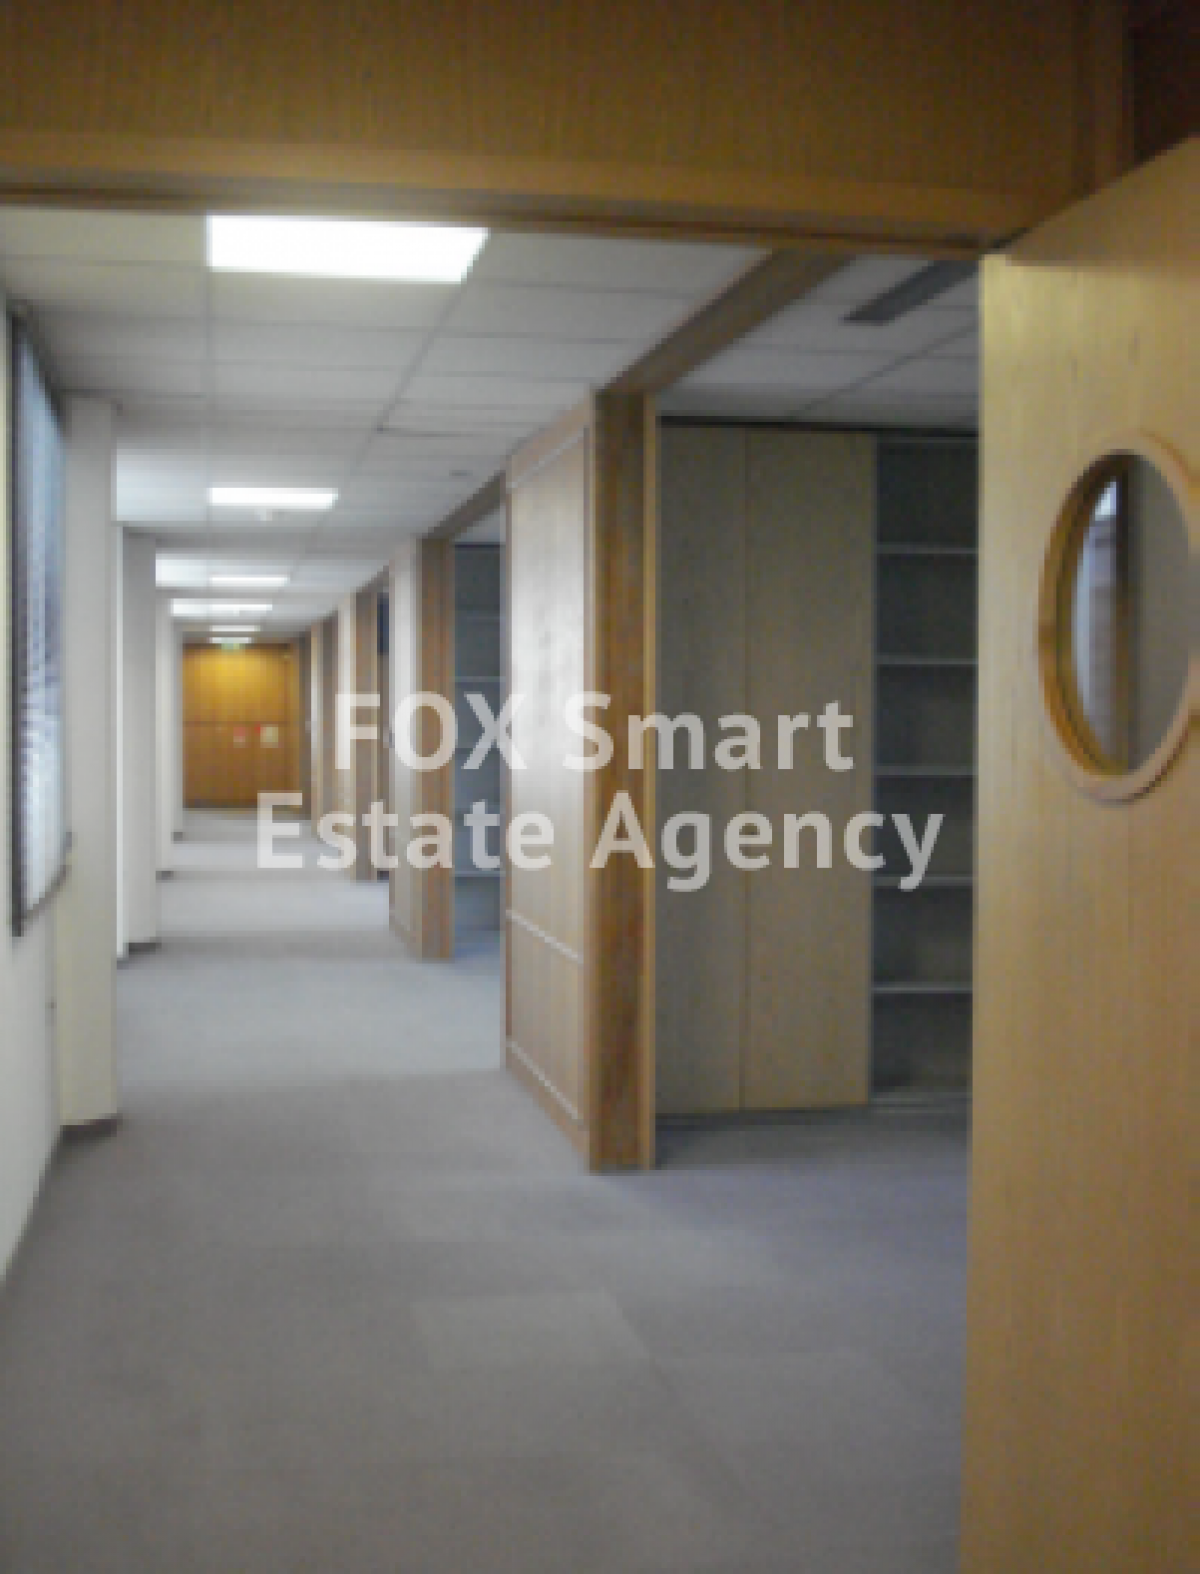 Picture of Office For Rent in Omonoia, Limassol, Cyprus